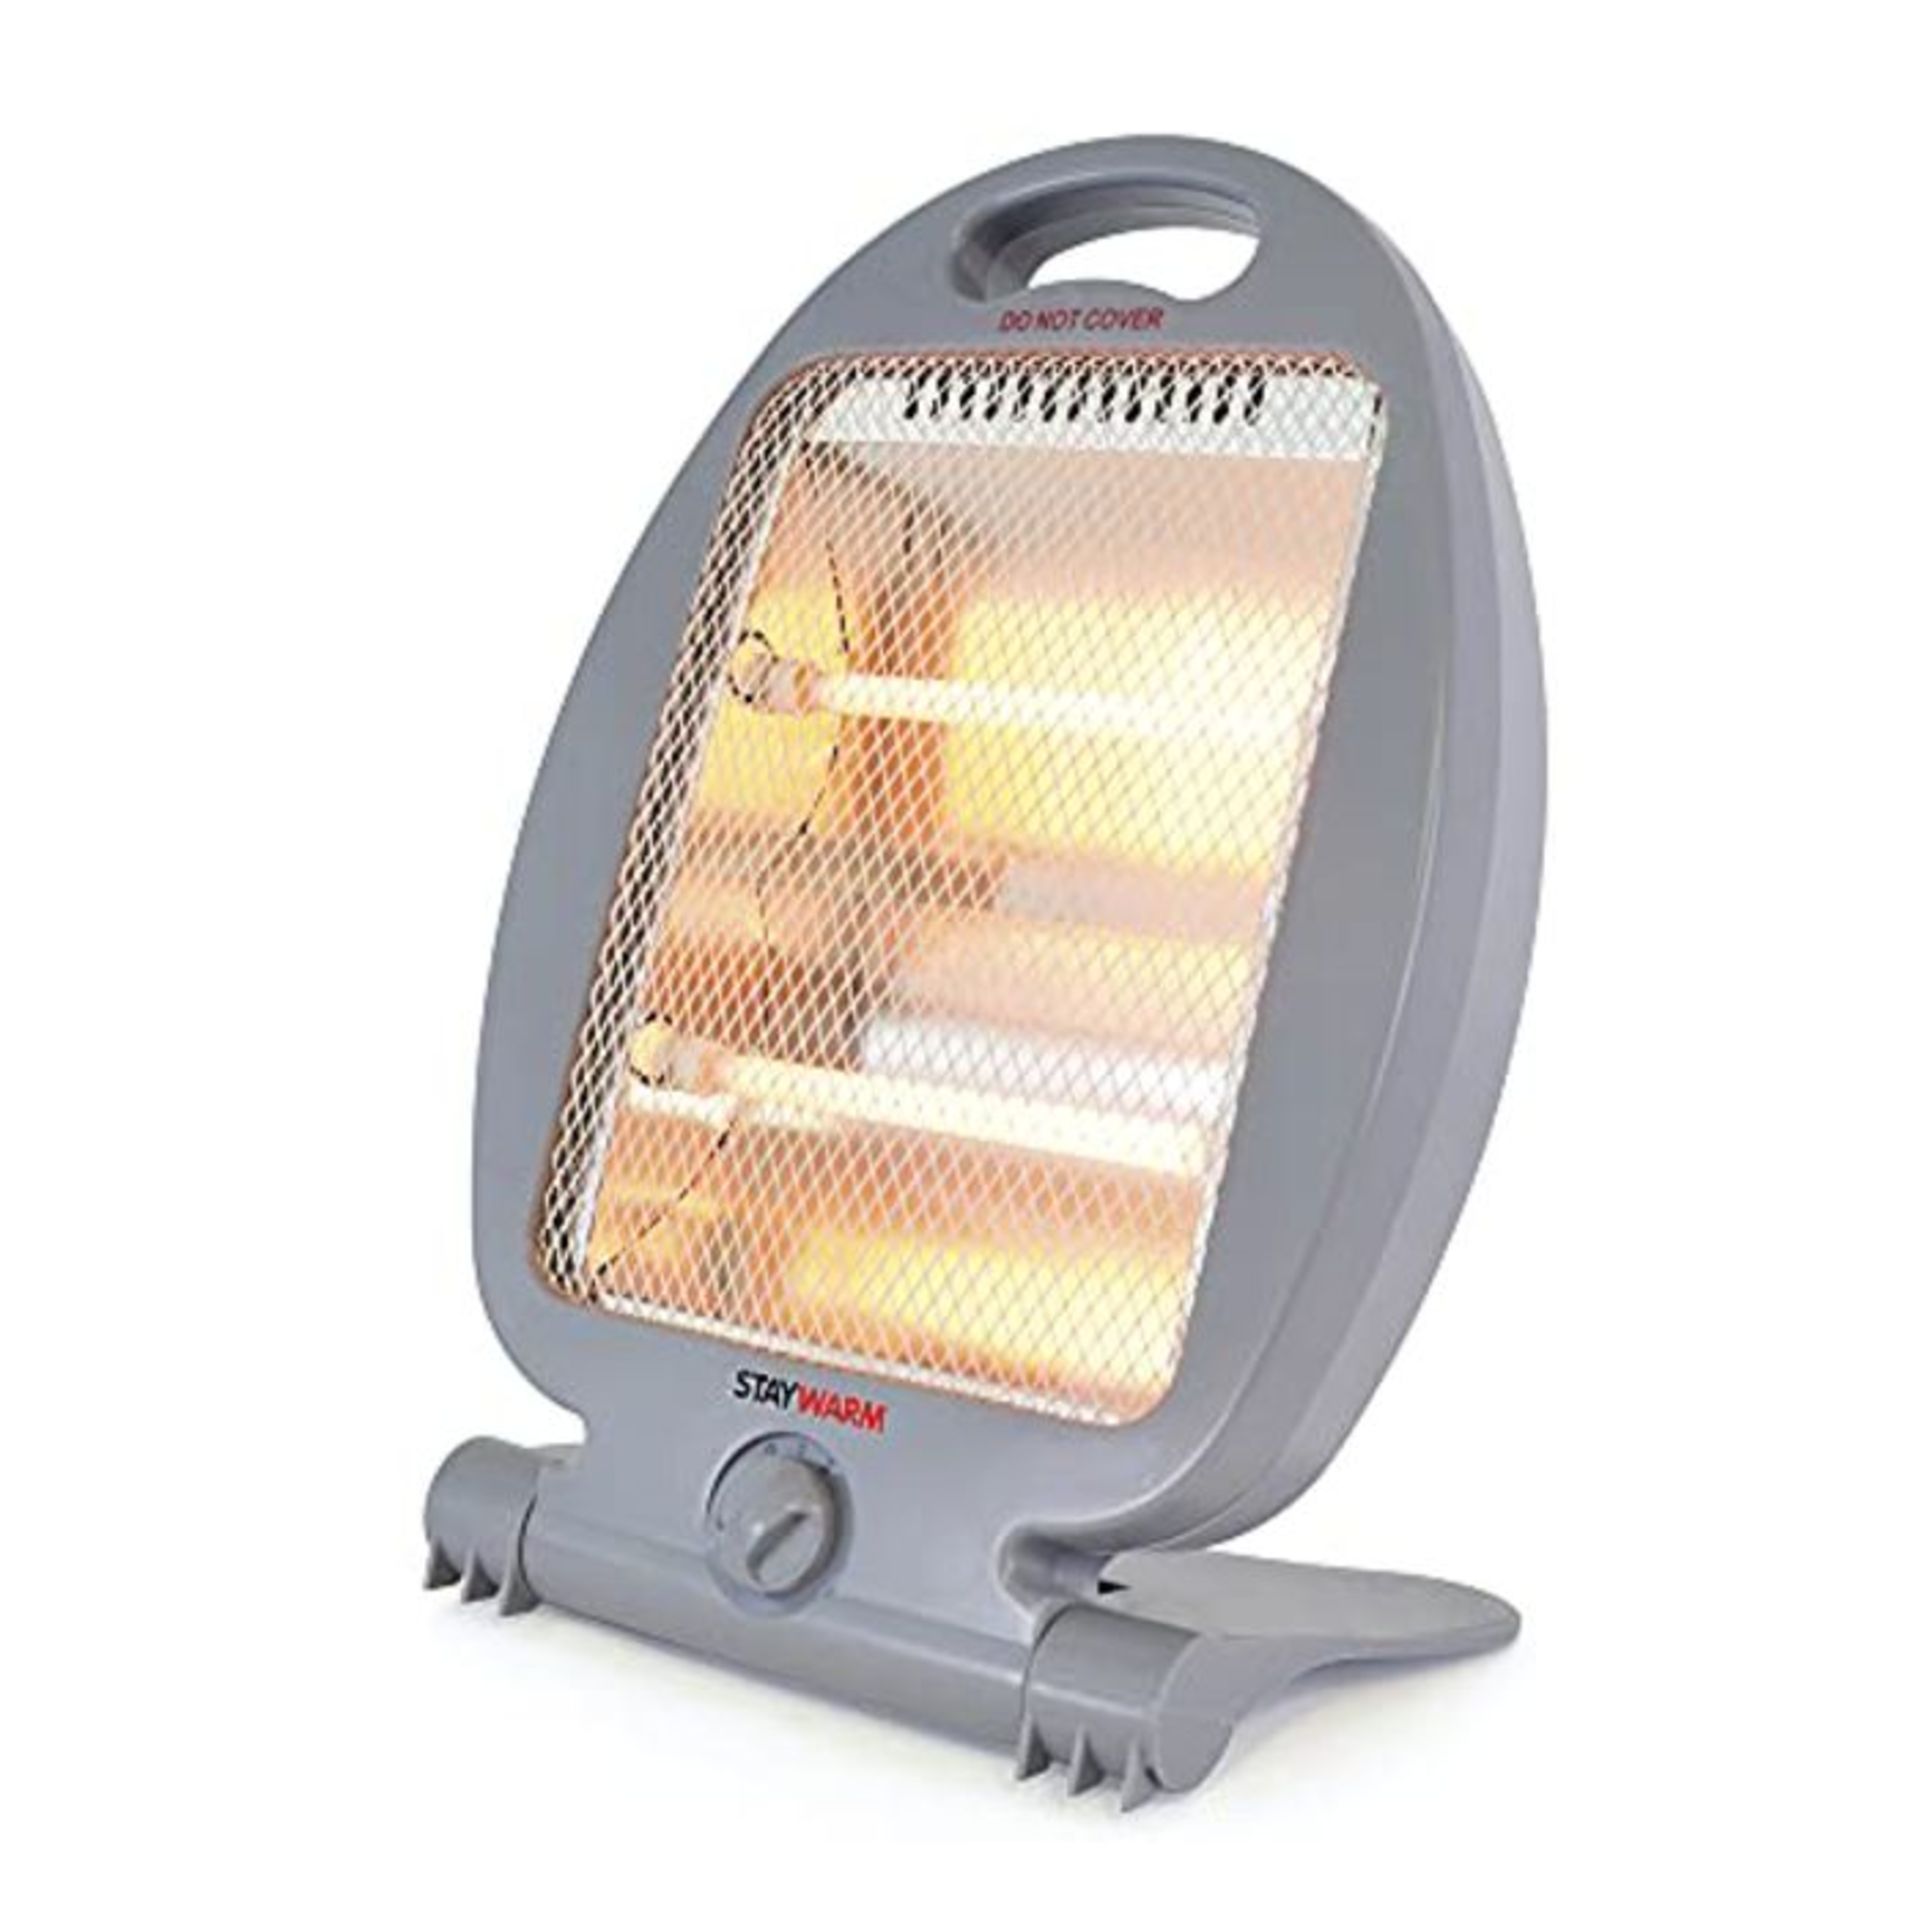 STAYWARM 800w 2 Bar Quartz Heater with 2 Heat Settings/Safety Tip-Over Switch/Wide Ang